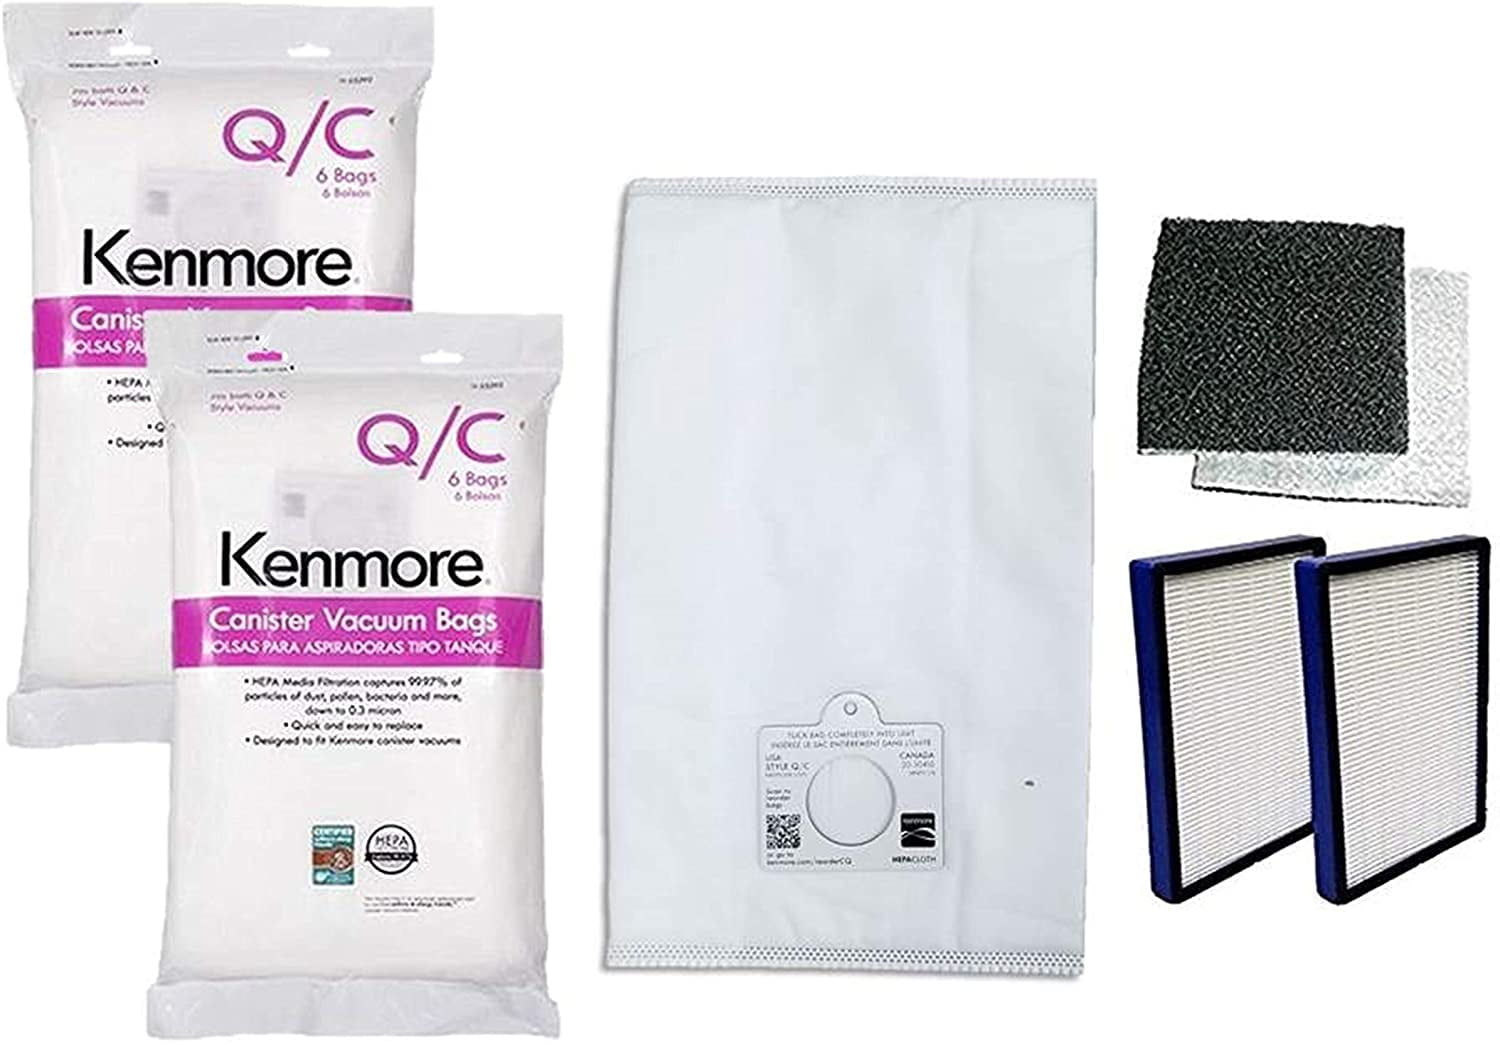 Kenmore Type C Canister Vacuum Bags Style 5055 50557 Sears Progressive Intuition 